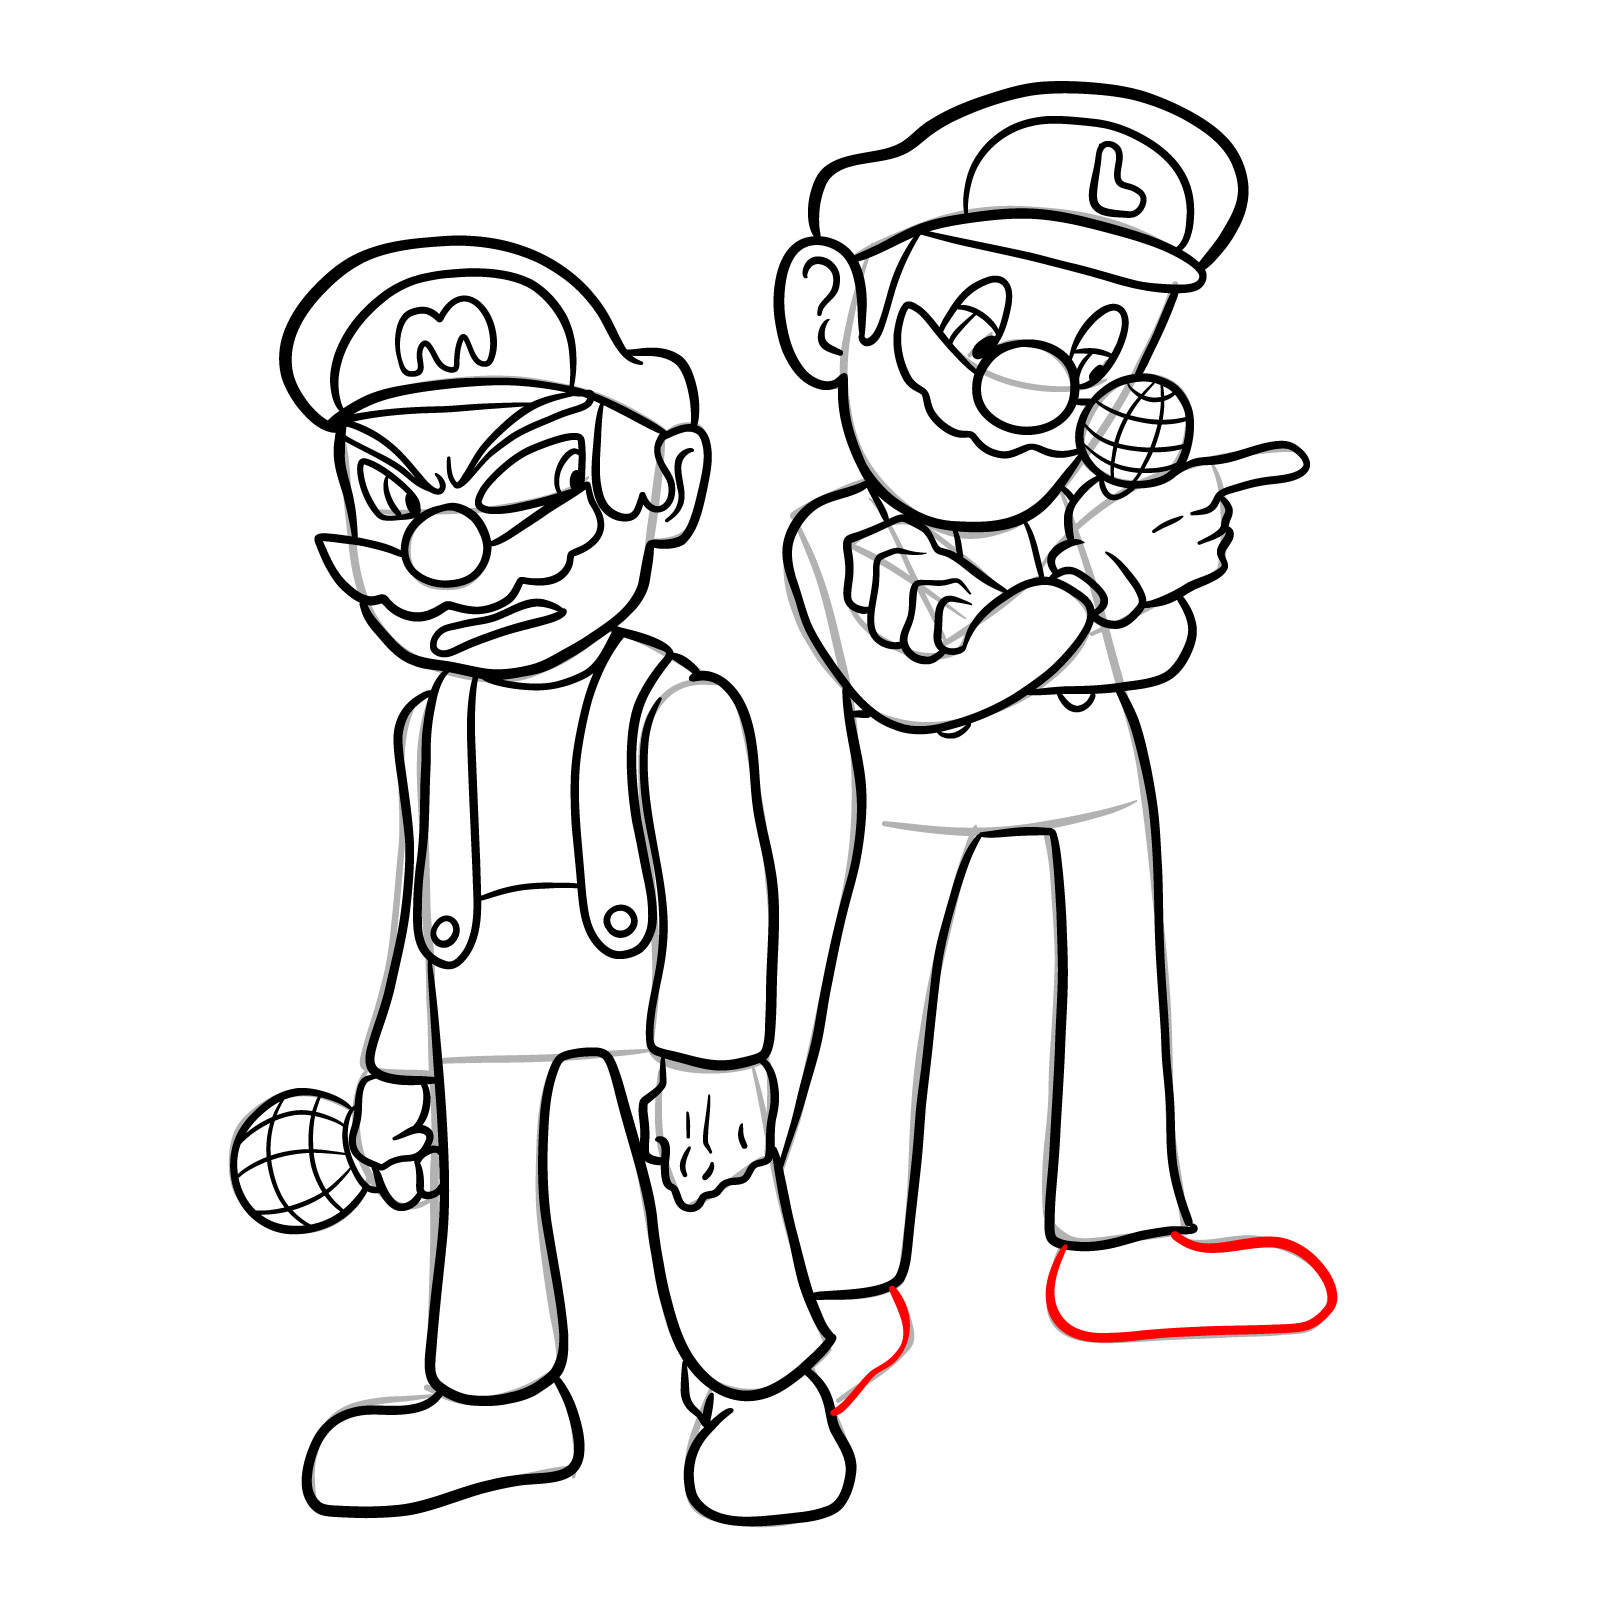 How to draw Mario and Luigi from Tails Gets Trolled - step 41